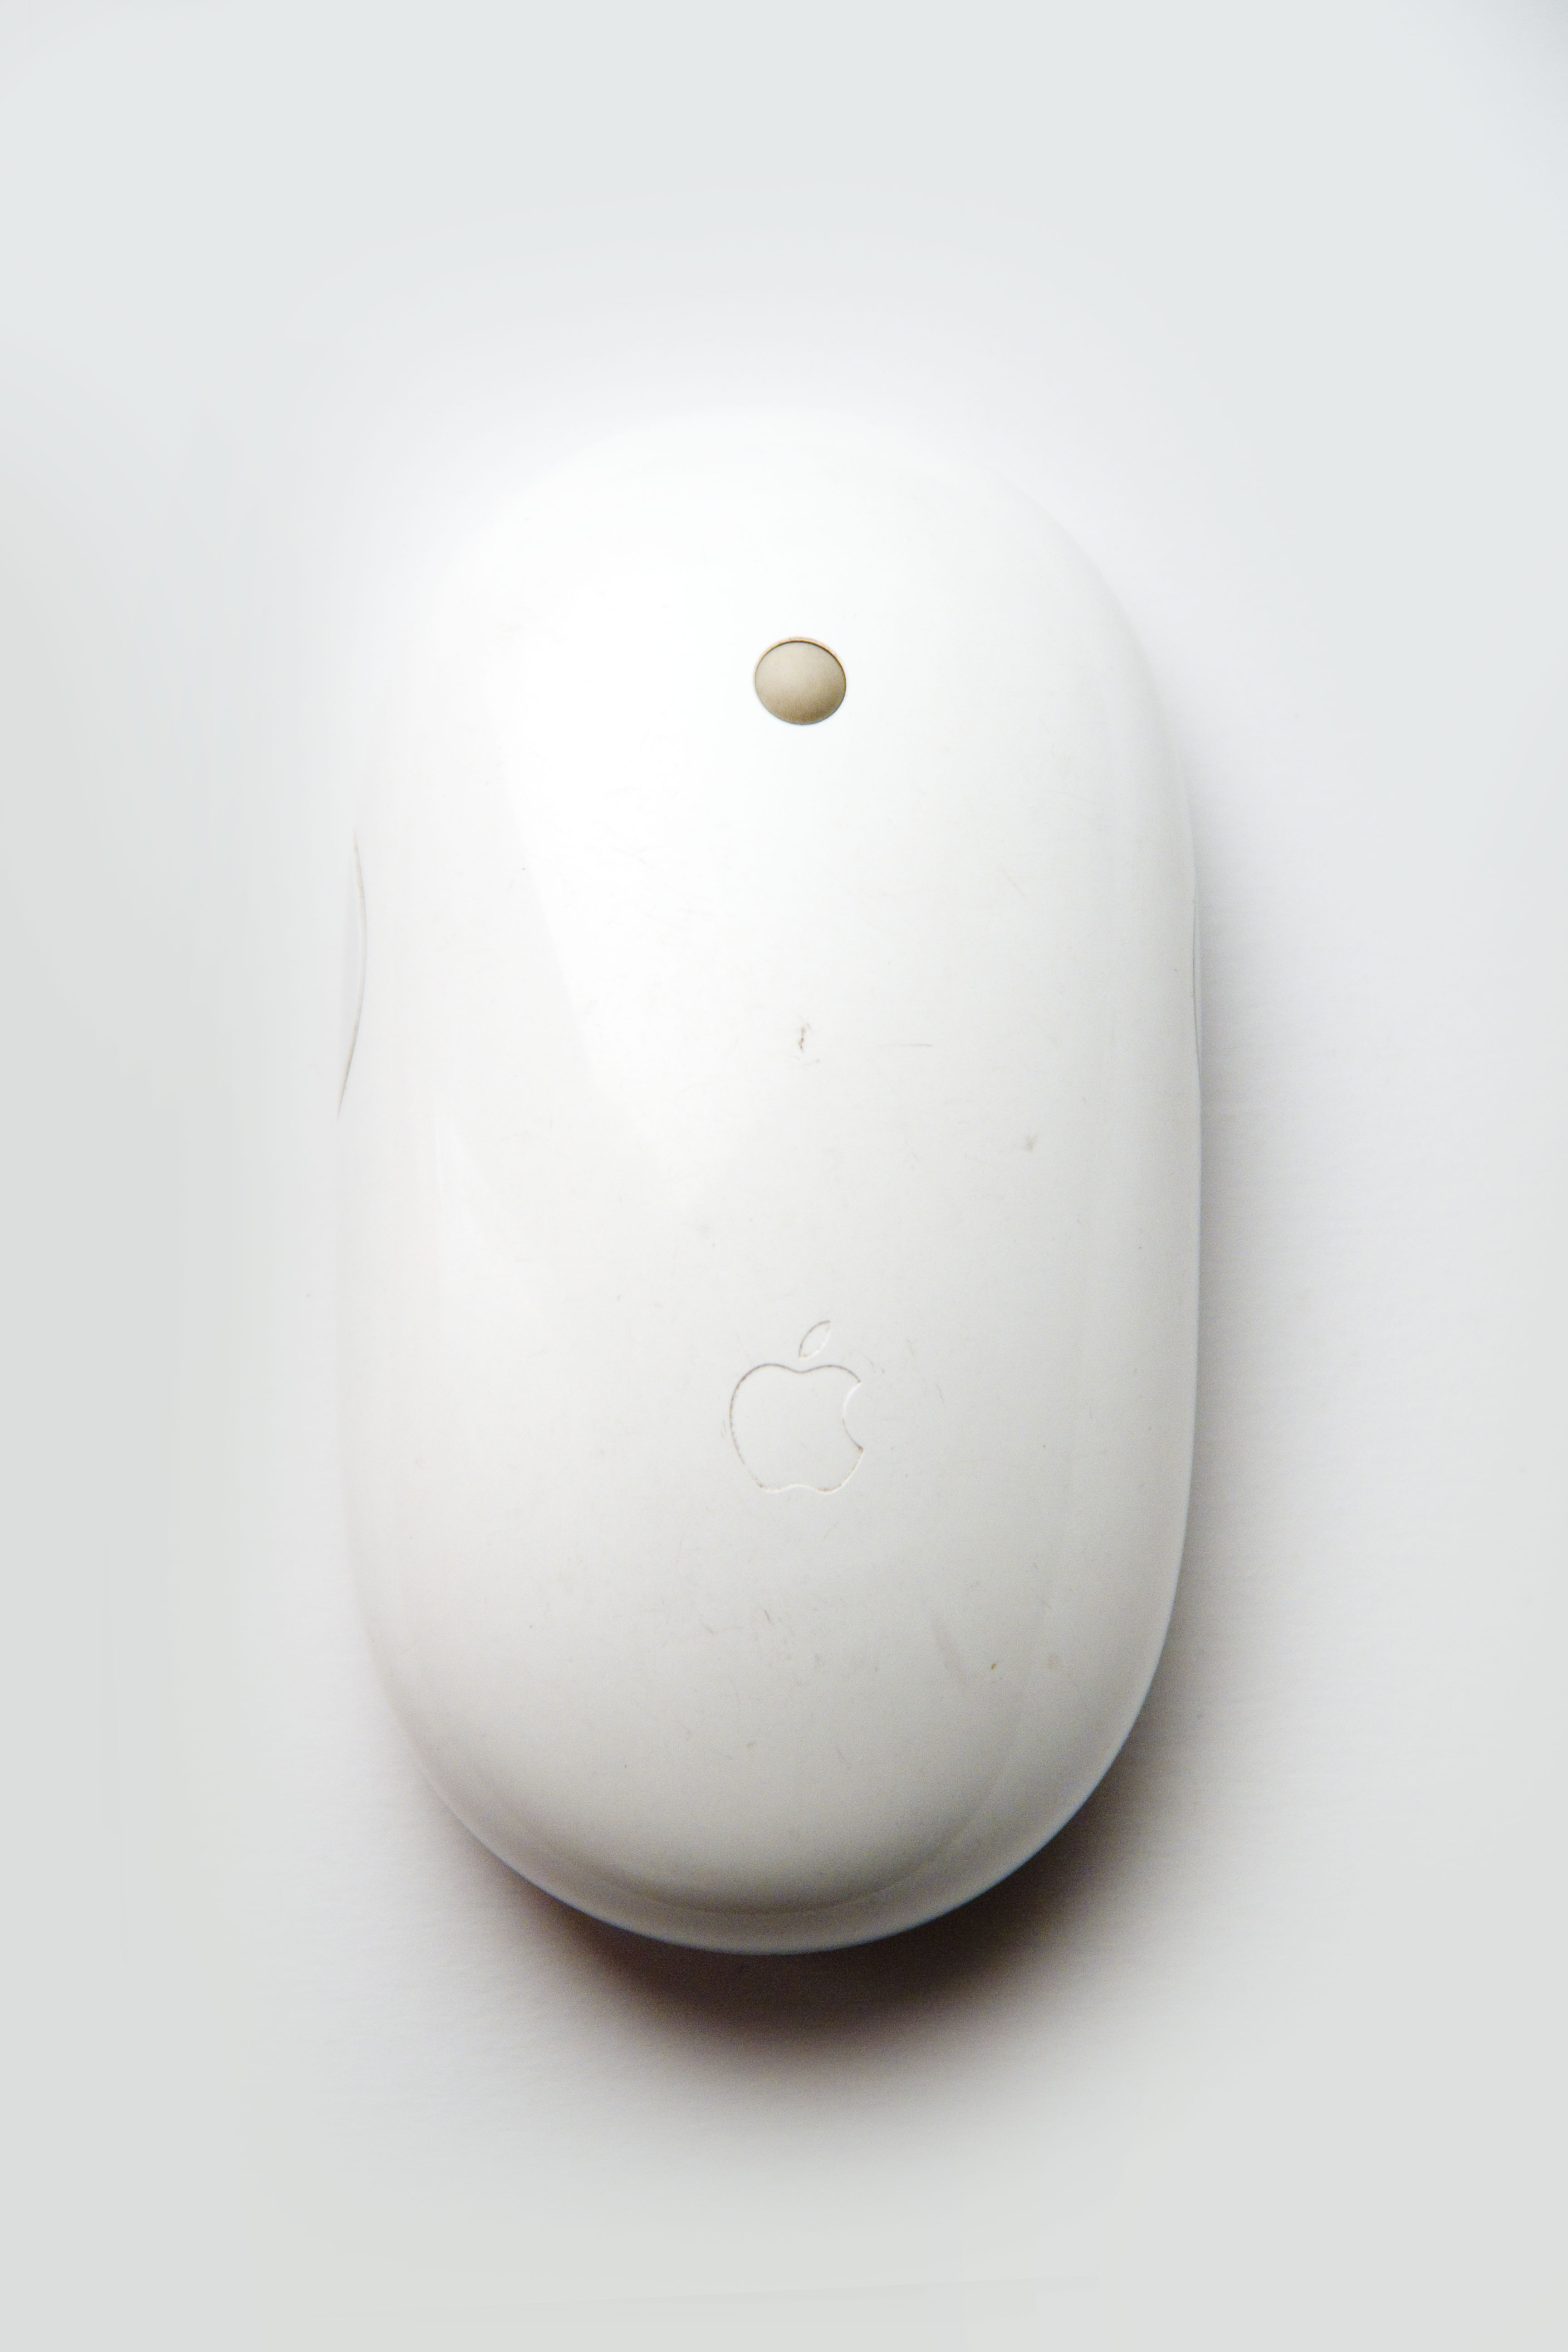 Mighty Mouse (Apple) — Wikipédia